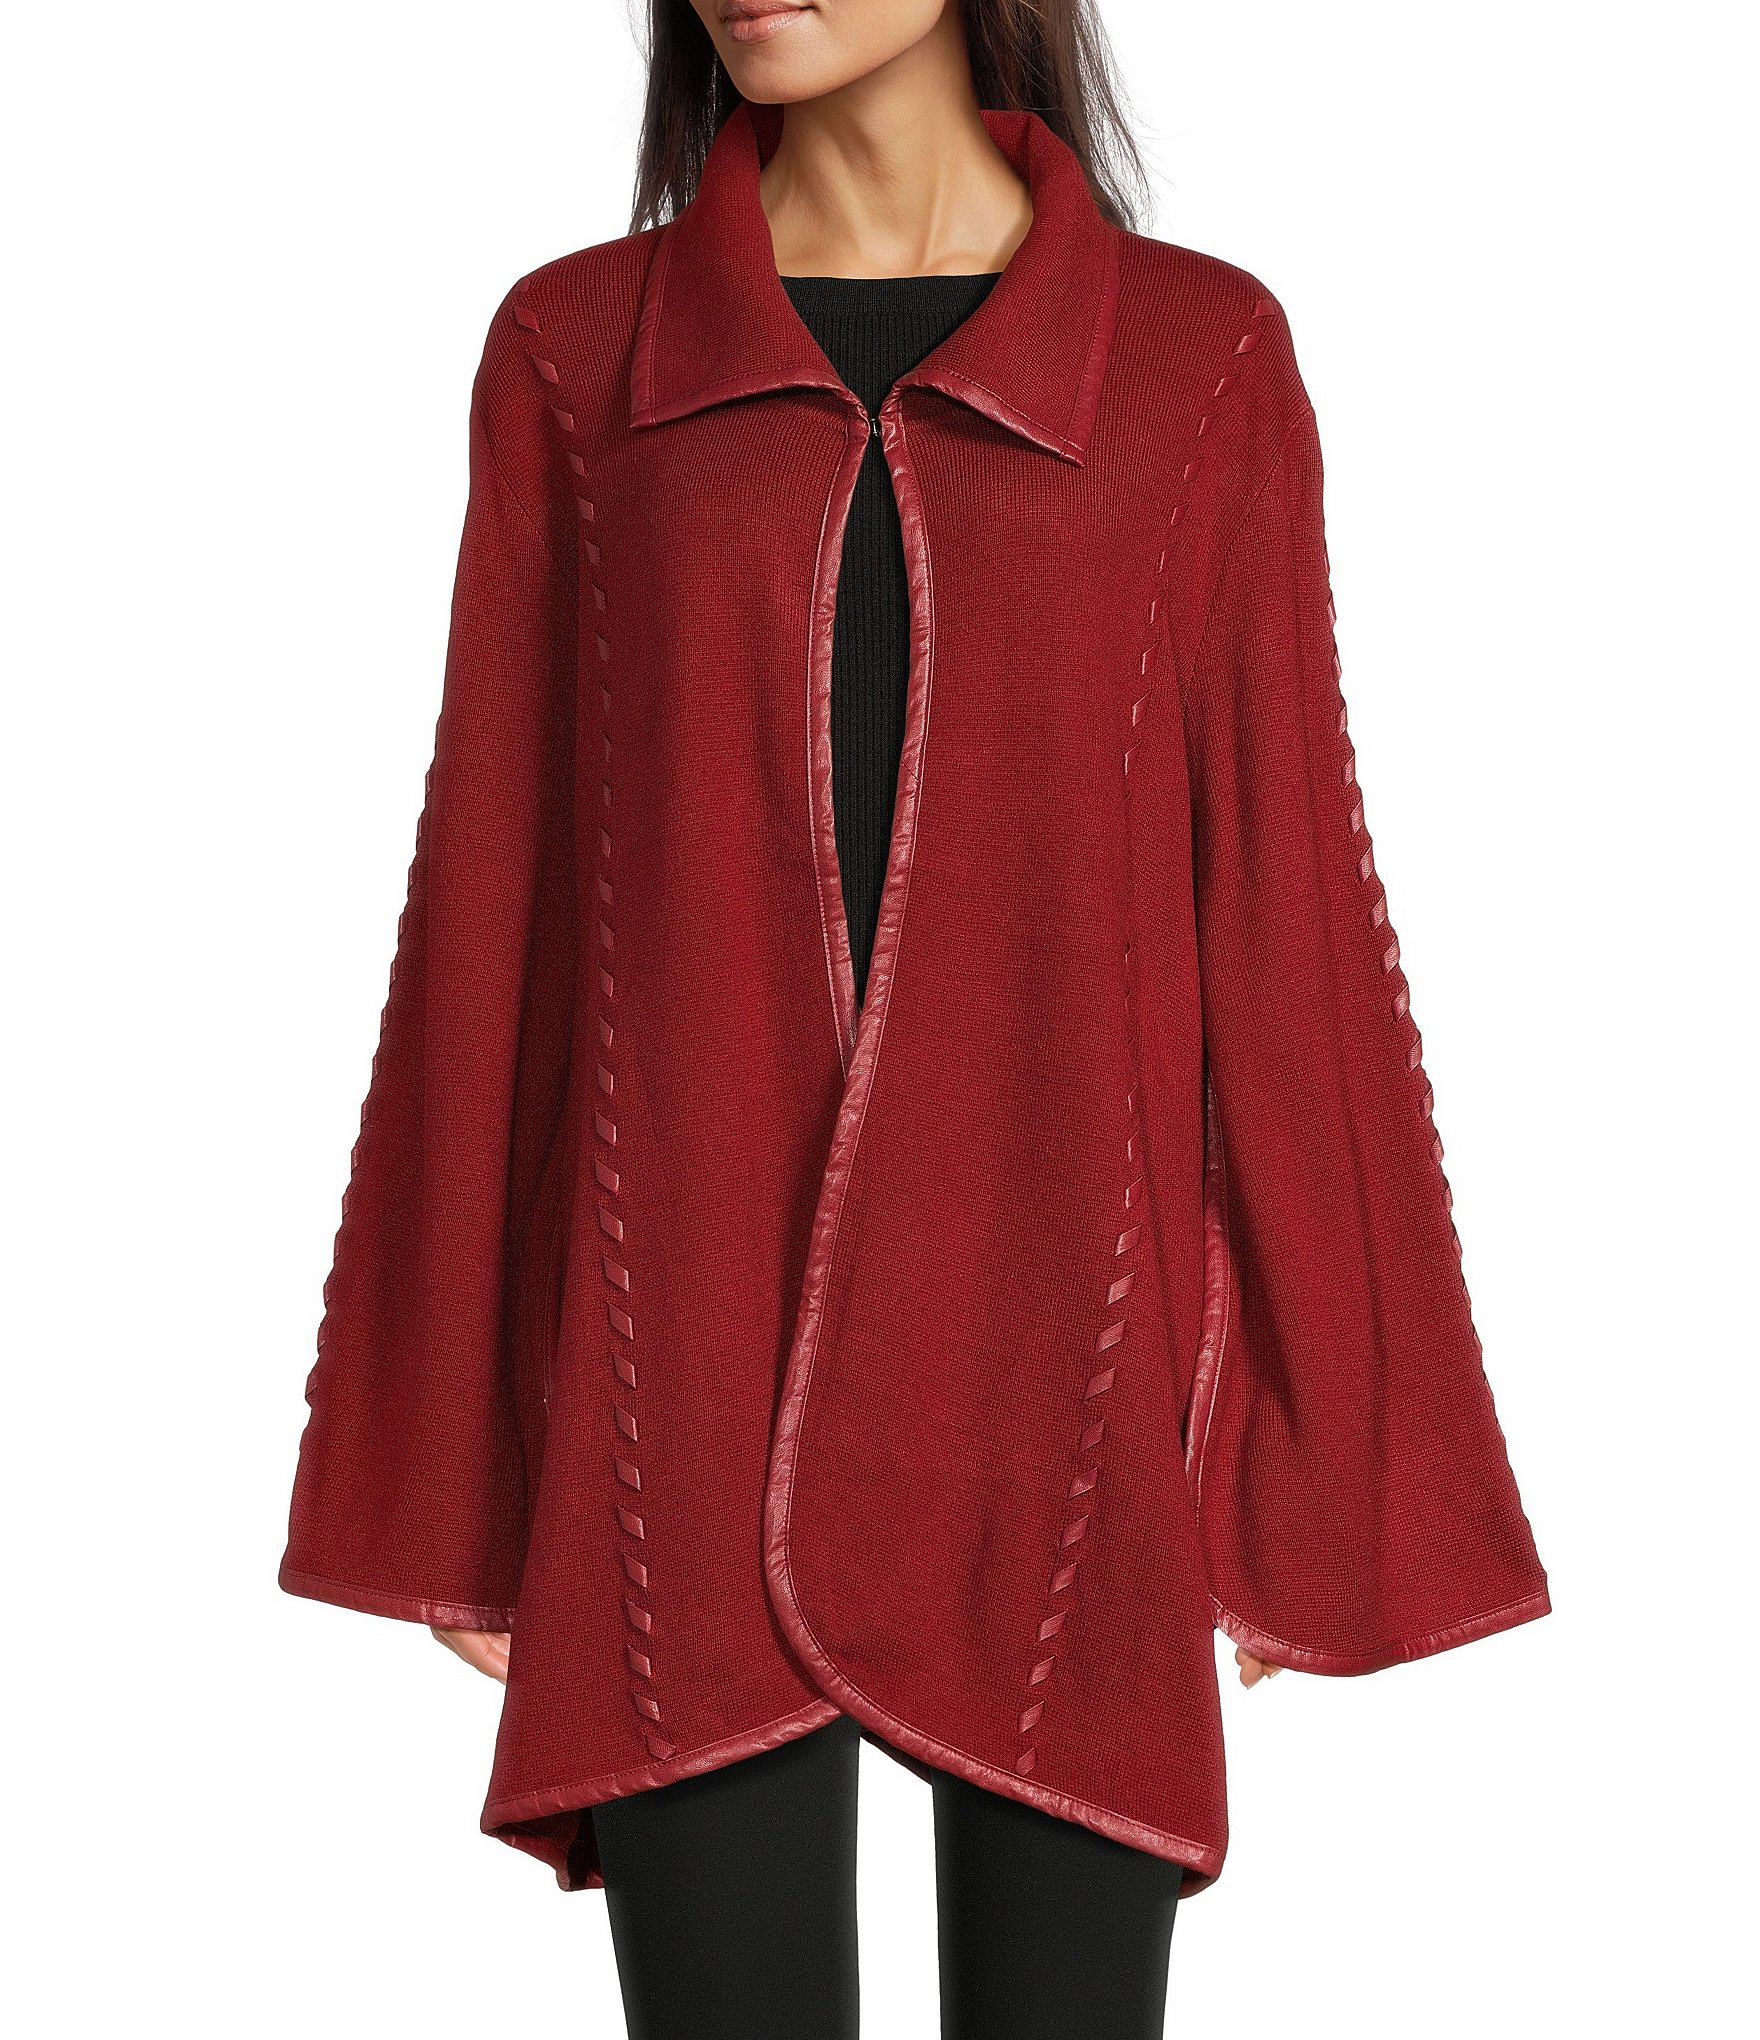 Patricia Nash Women's Hooded Cape with Buttons